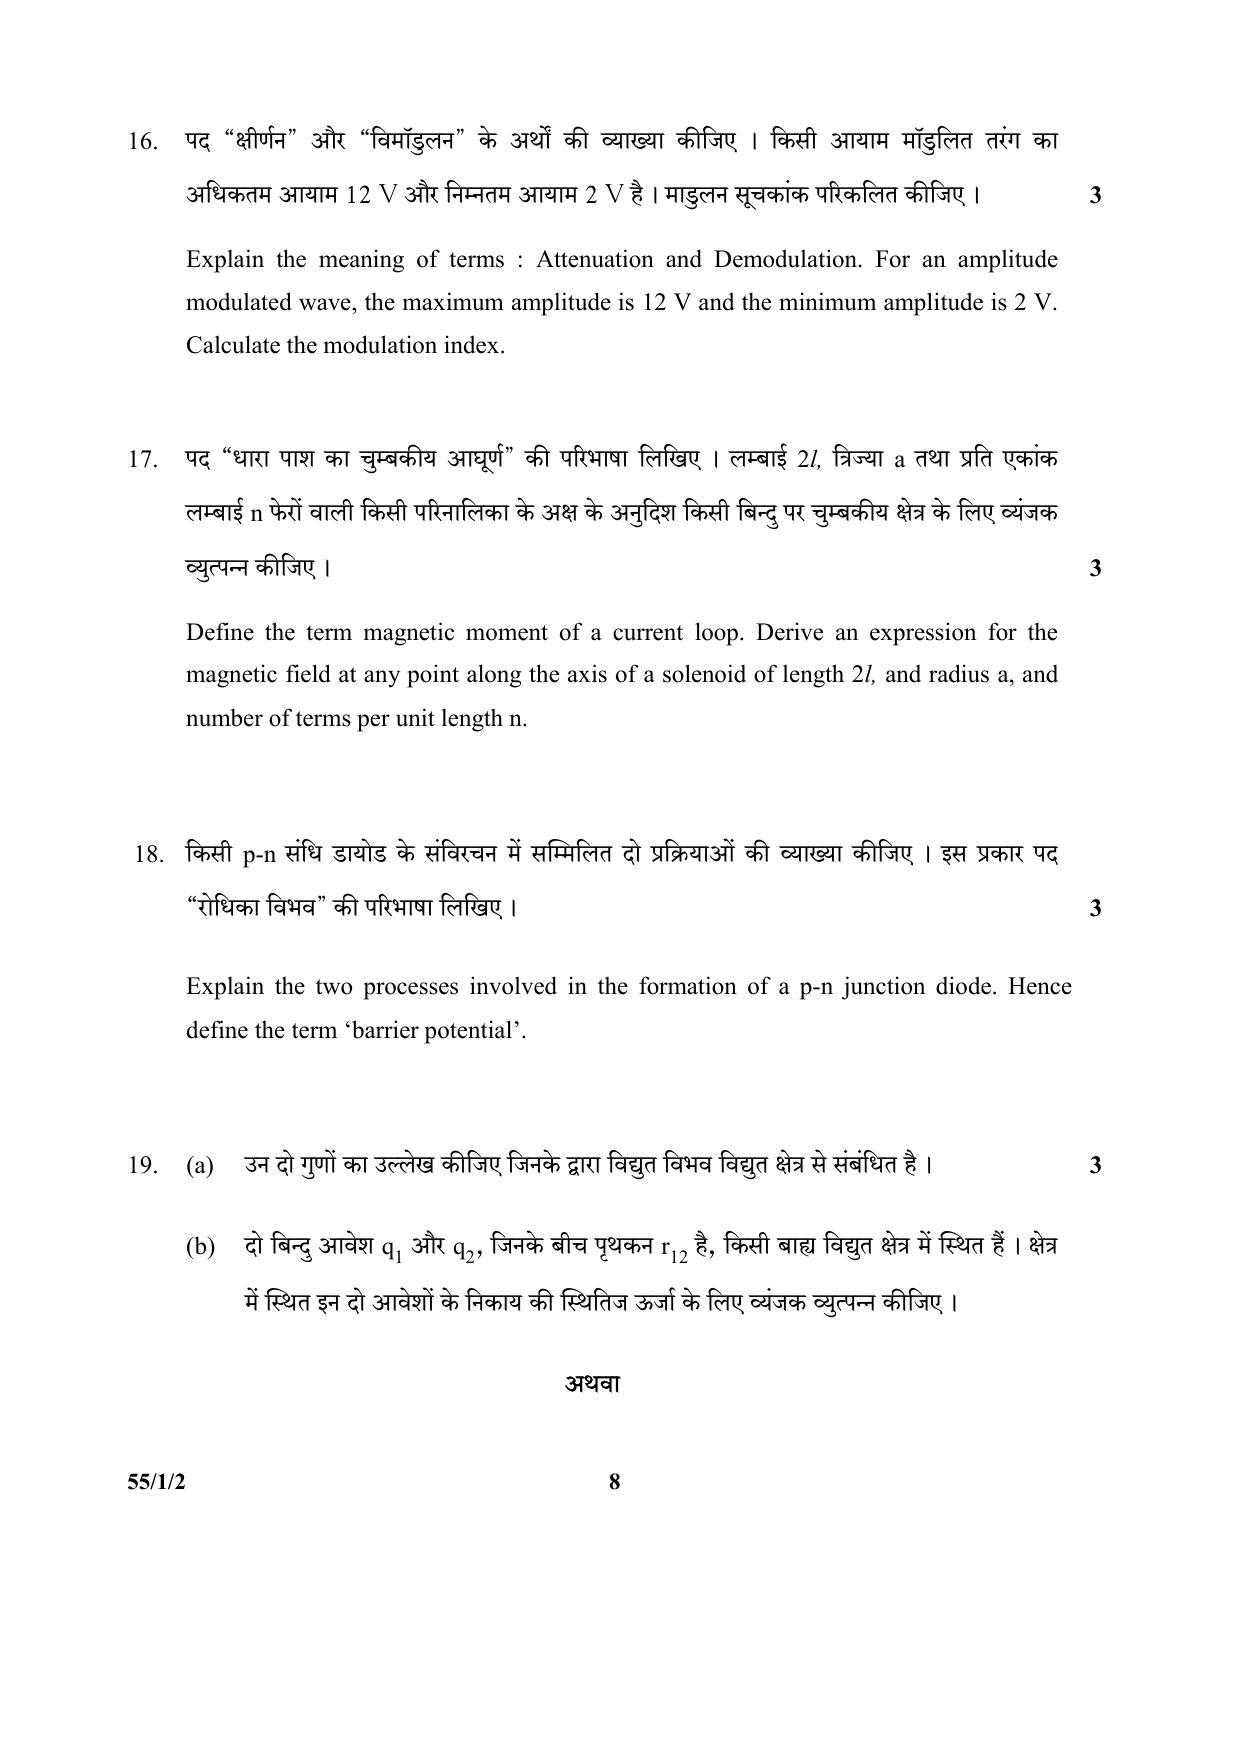 CBSE Class 12 55-1-2 (Physics) 2017-comptt Question Paper - Page 8